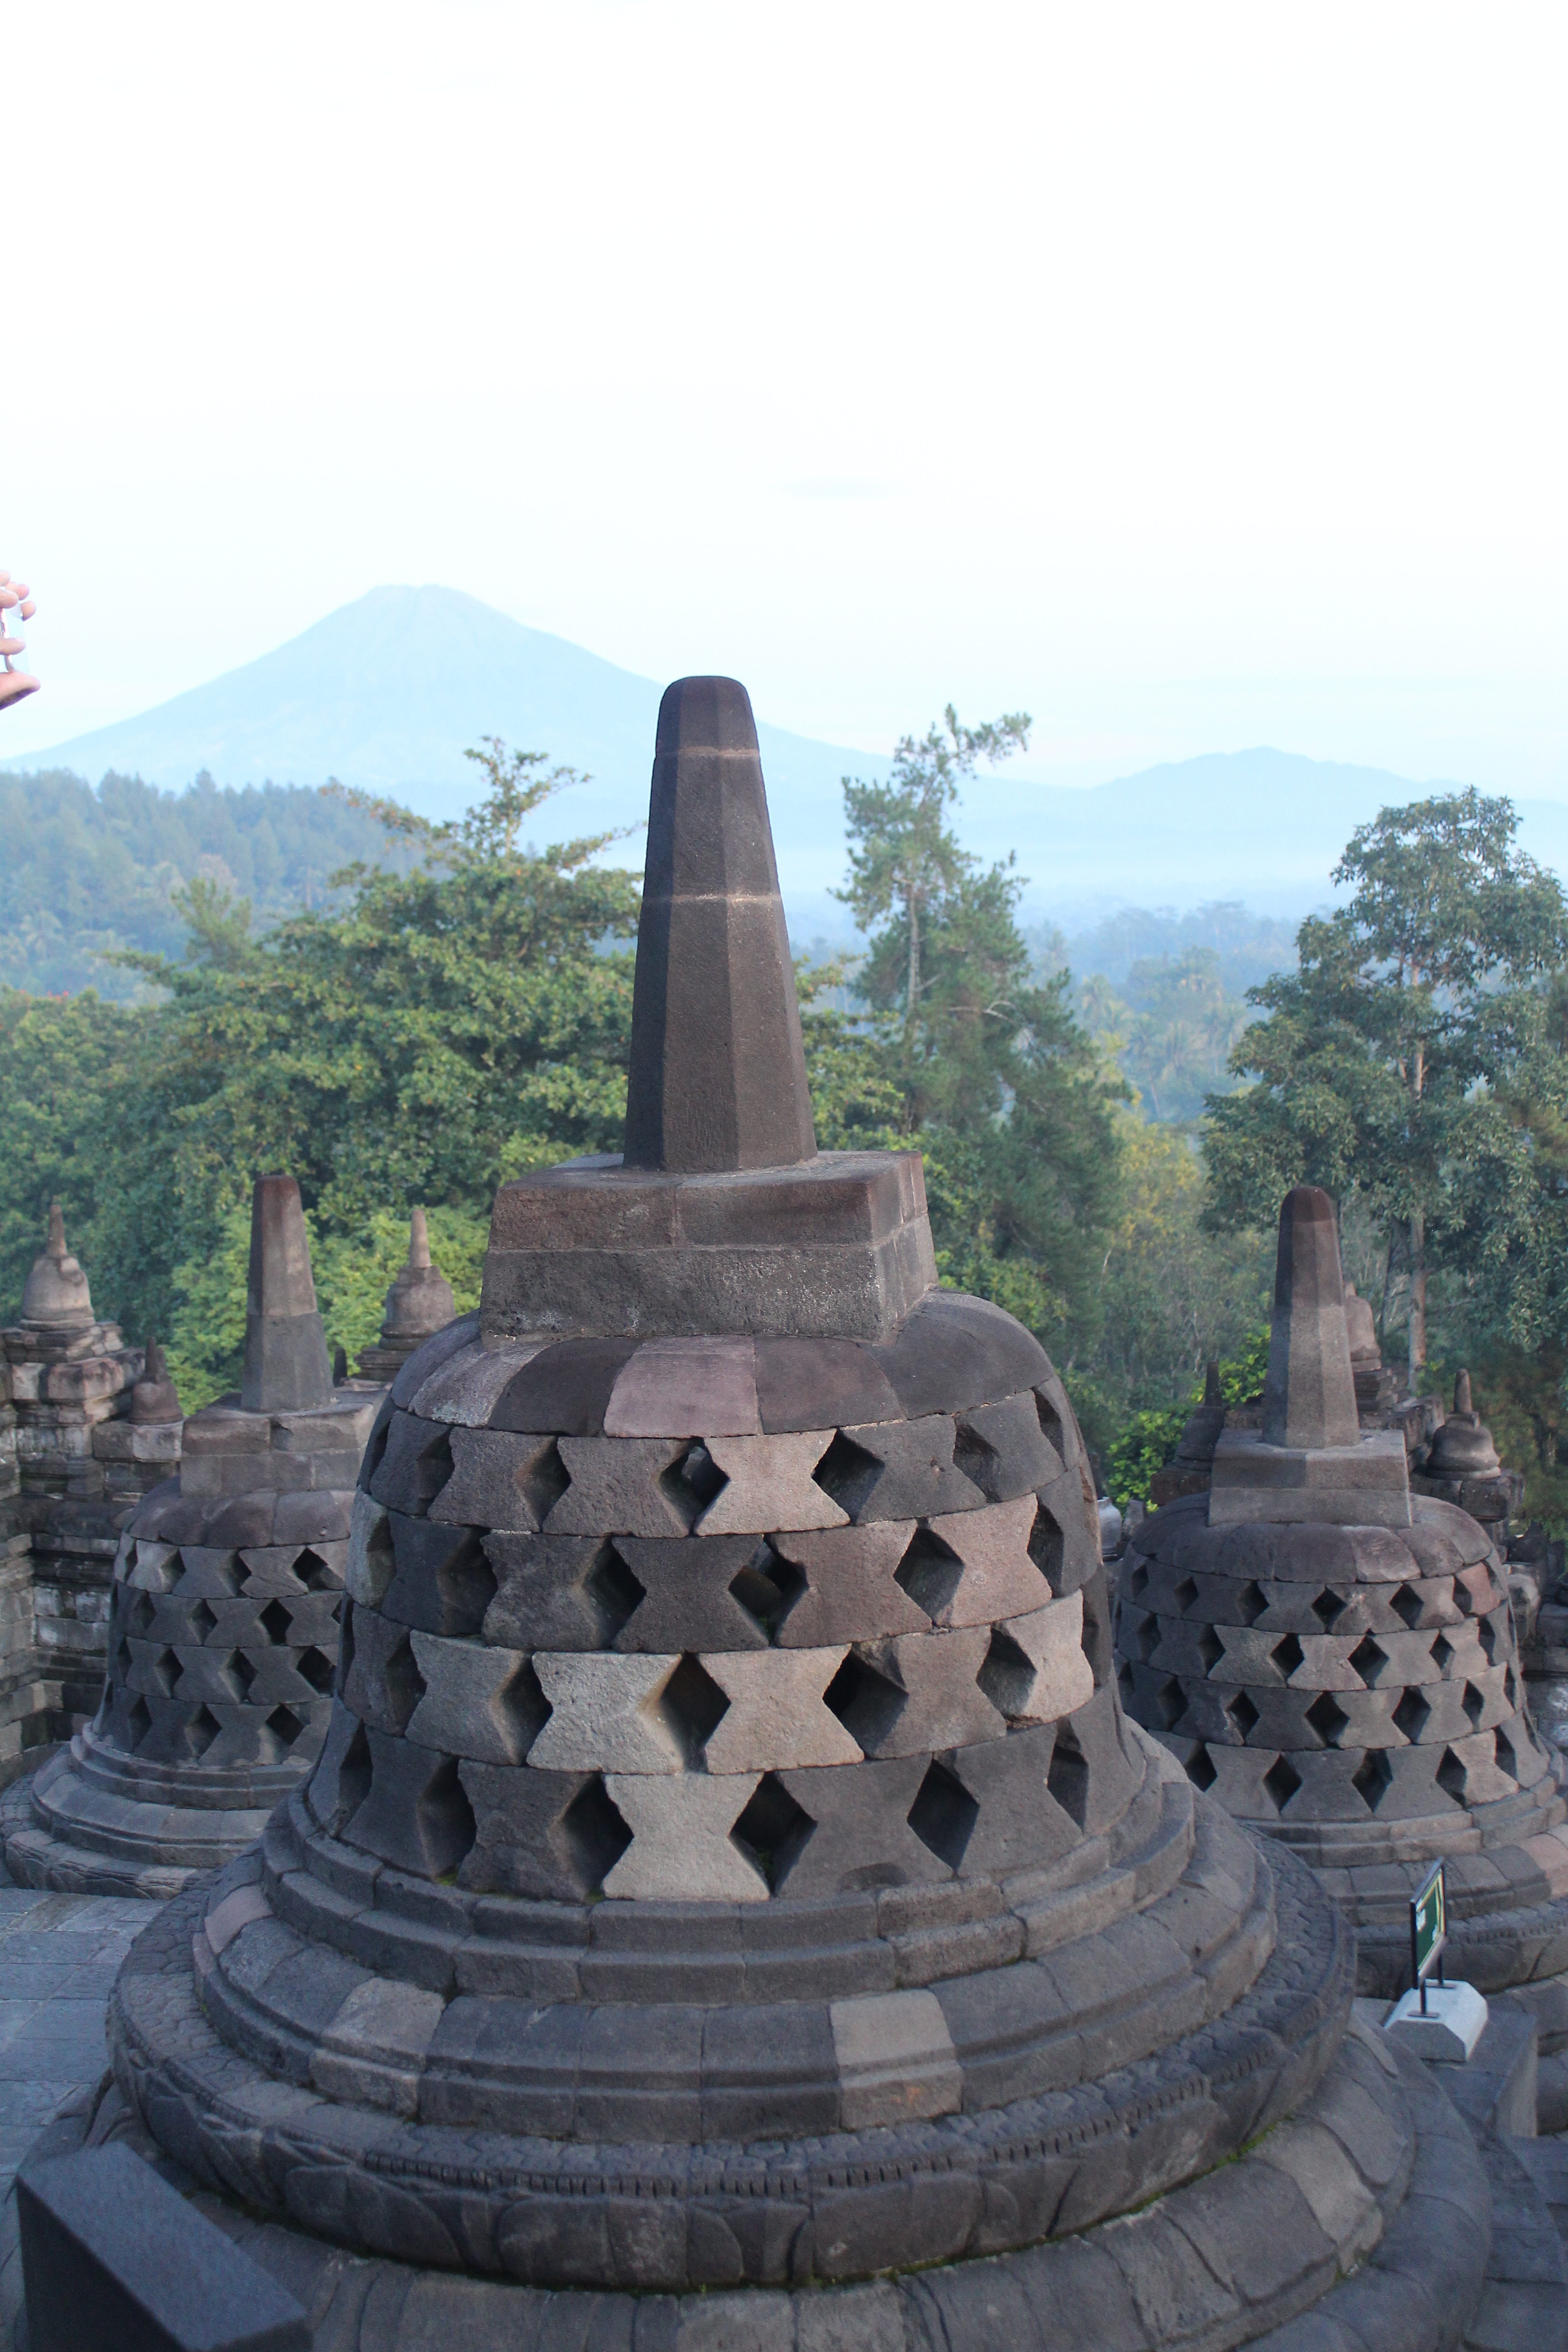 A cluster of stupas on descending levels, with green jungle and a mountain beyond